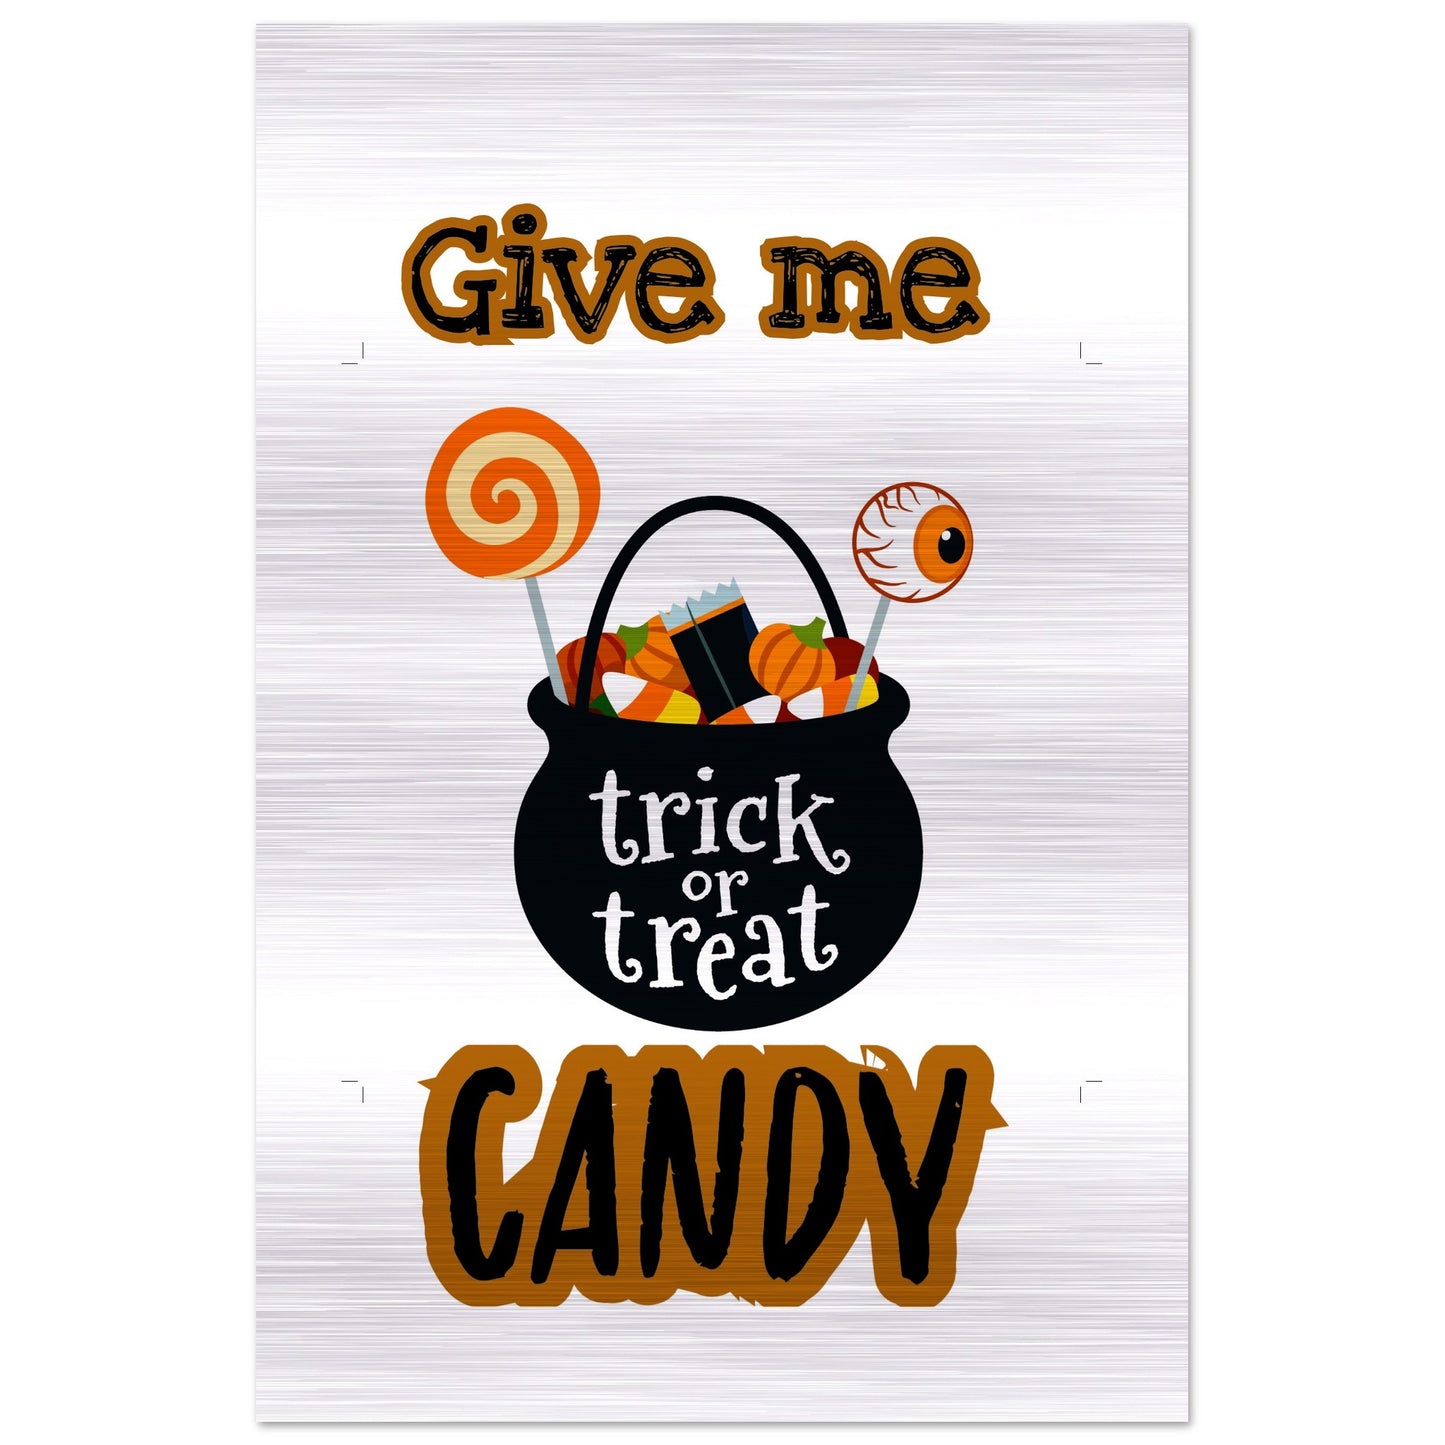 Give me candy -Brushed Aluminum Print